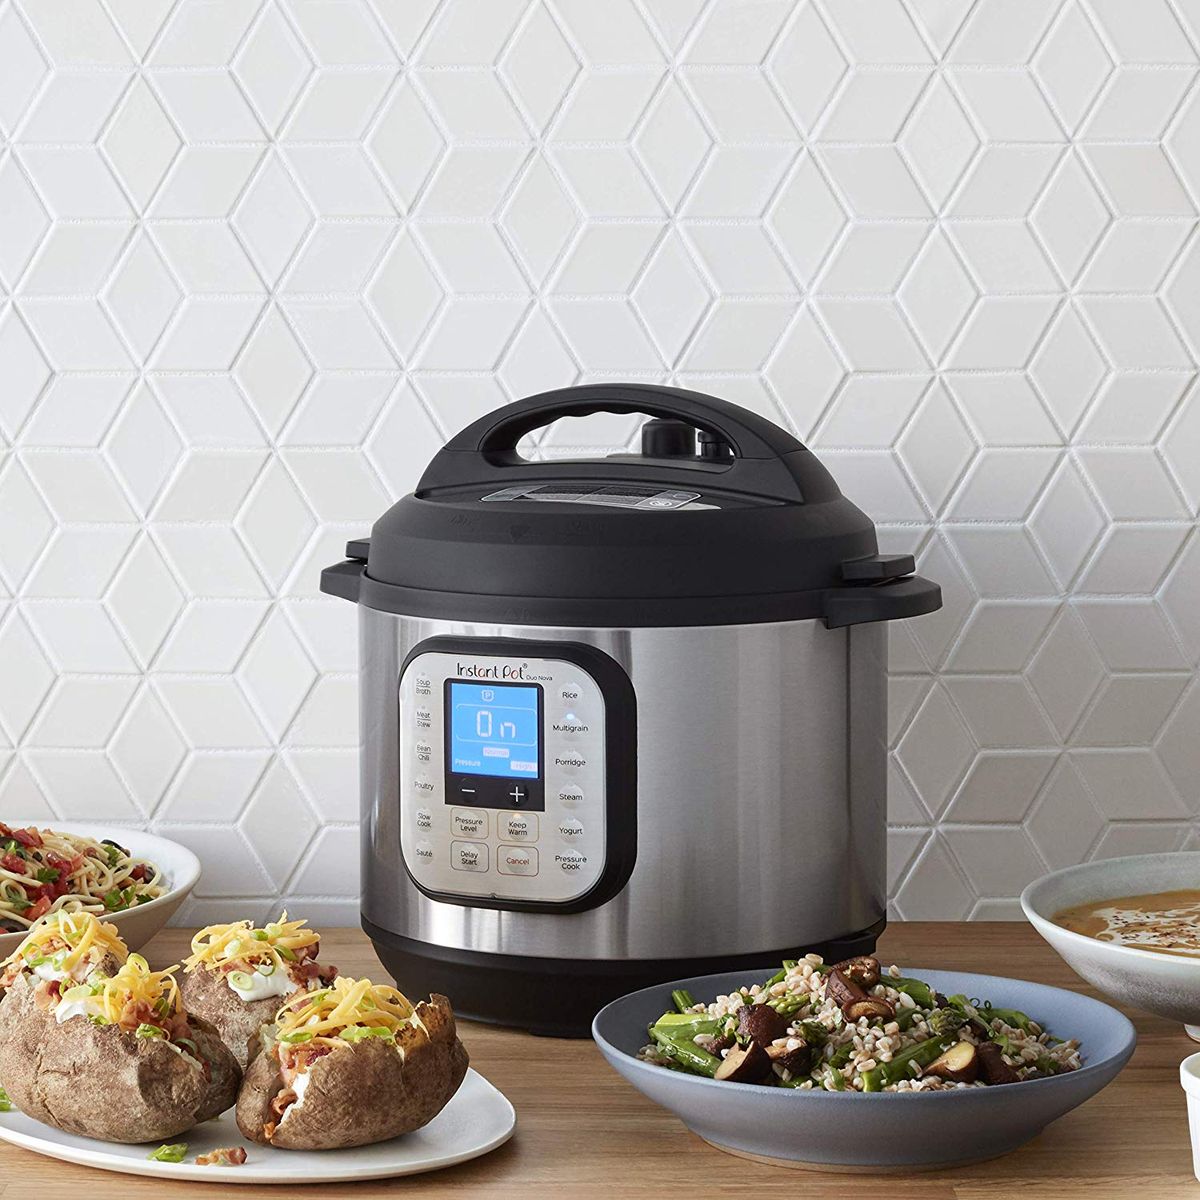 The newest Instant Pot is at its lowest price ever right now